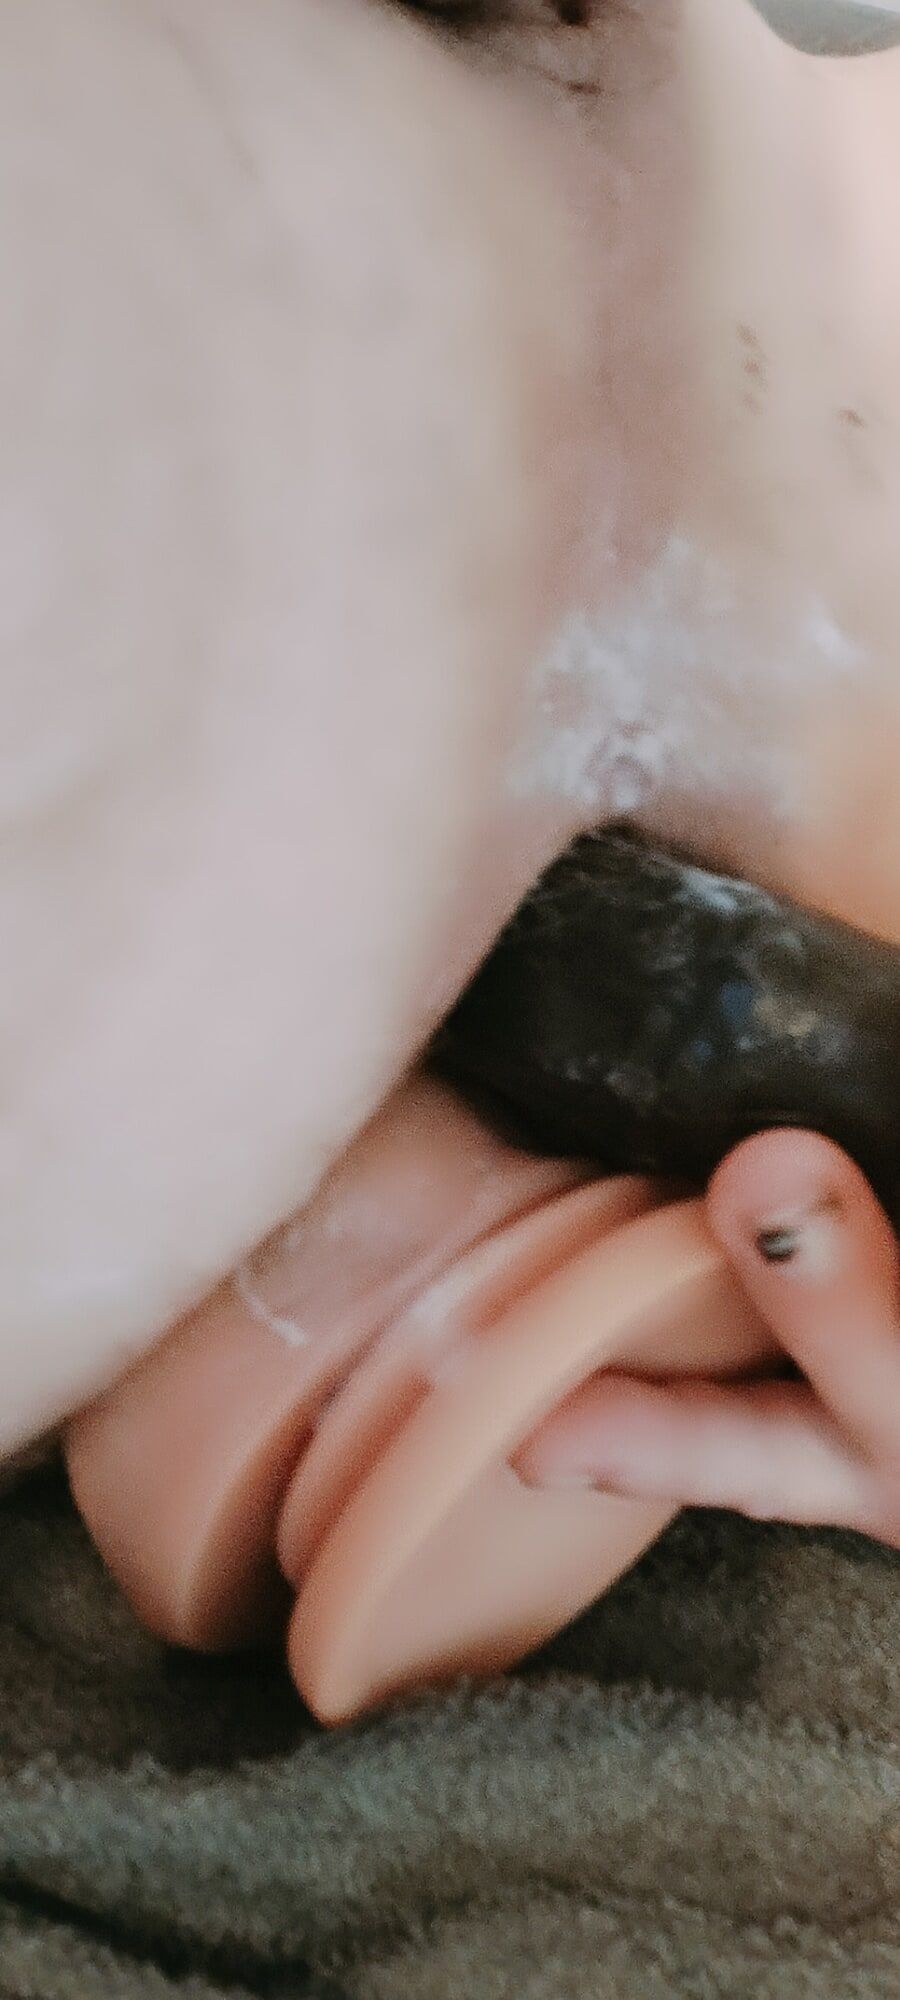 Random pics of my cock and asshole  #2